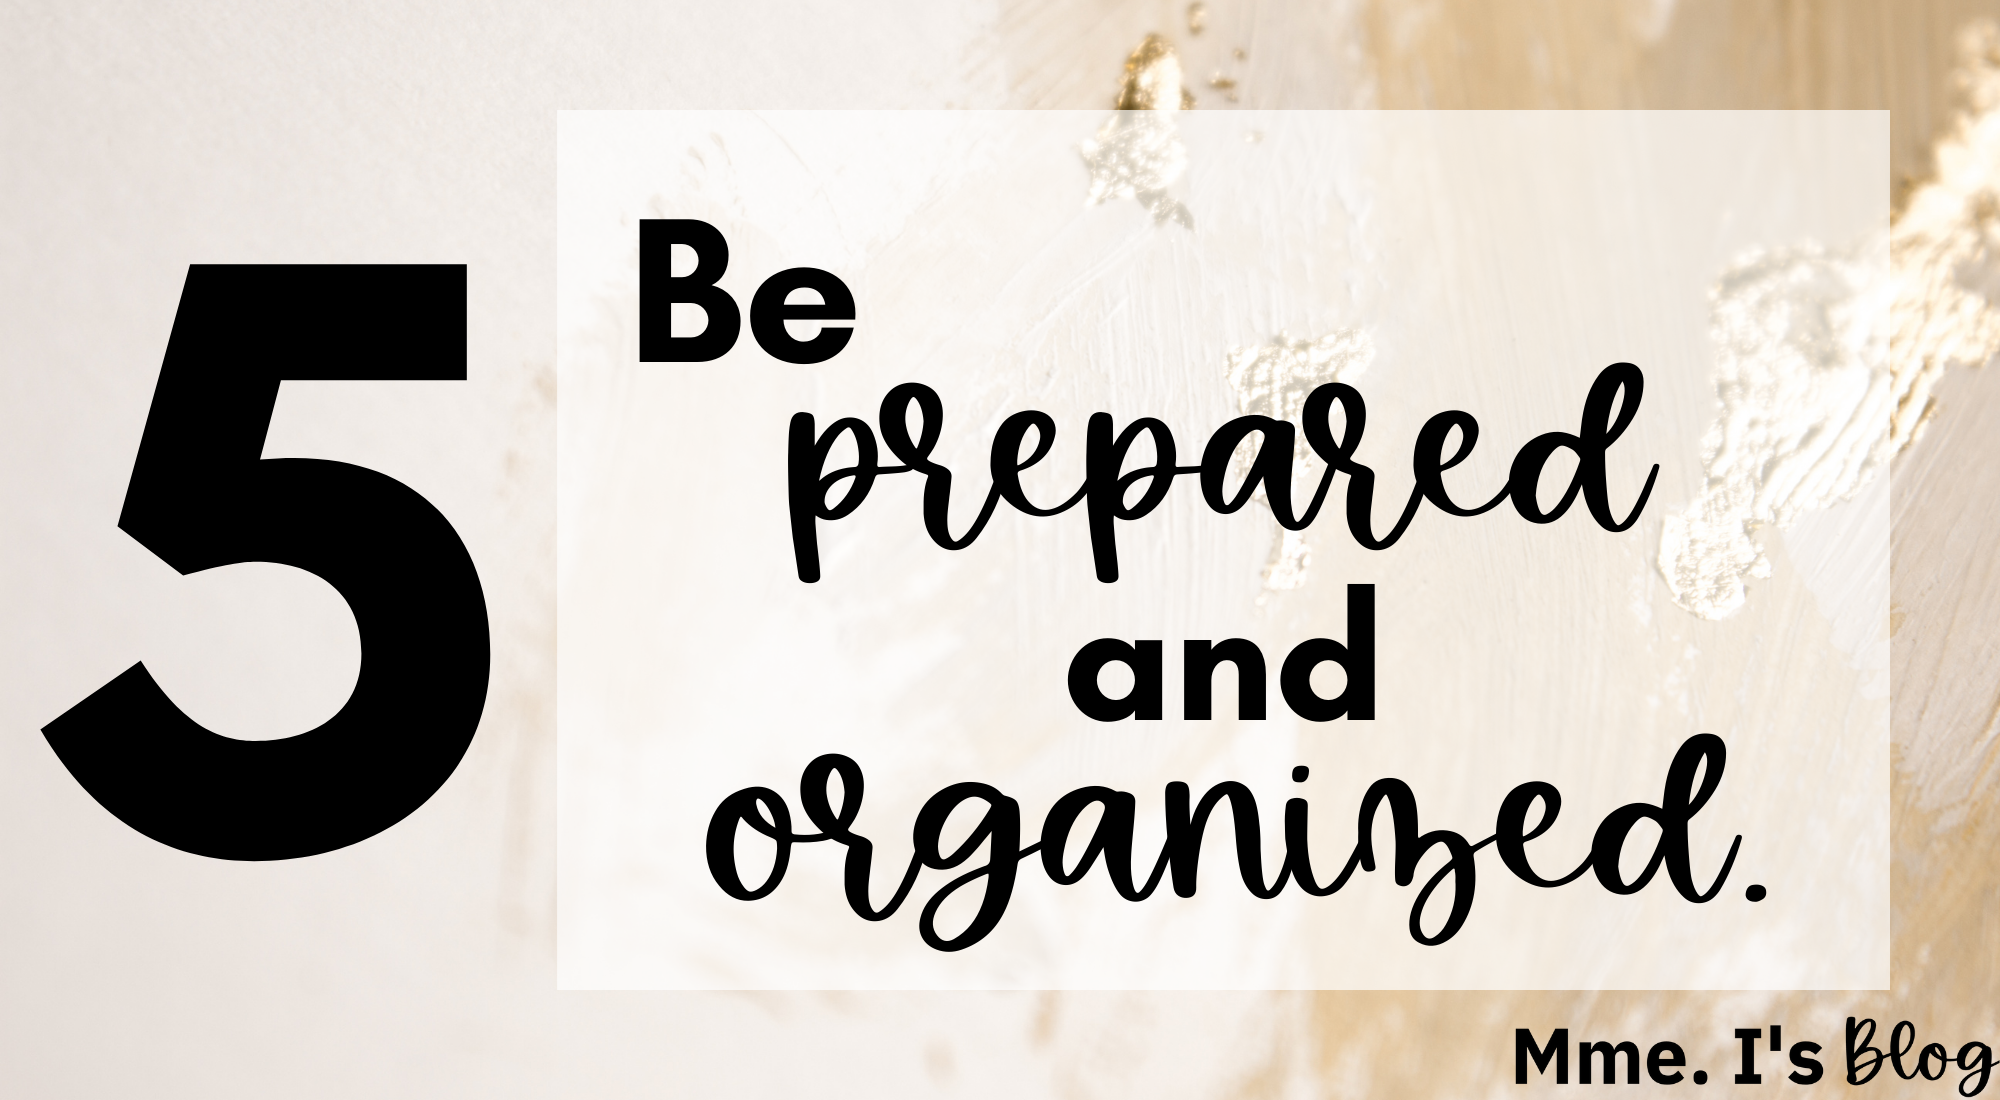 Be prepared and organized